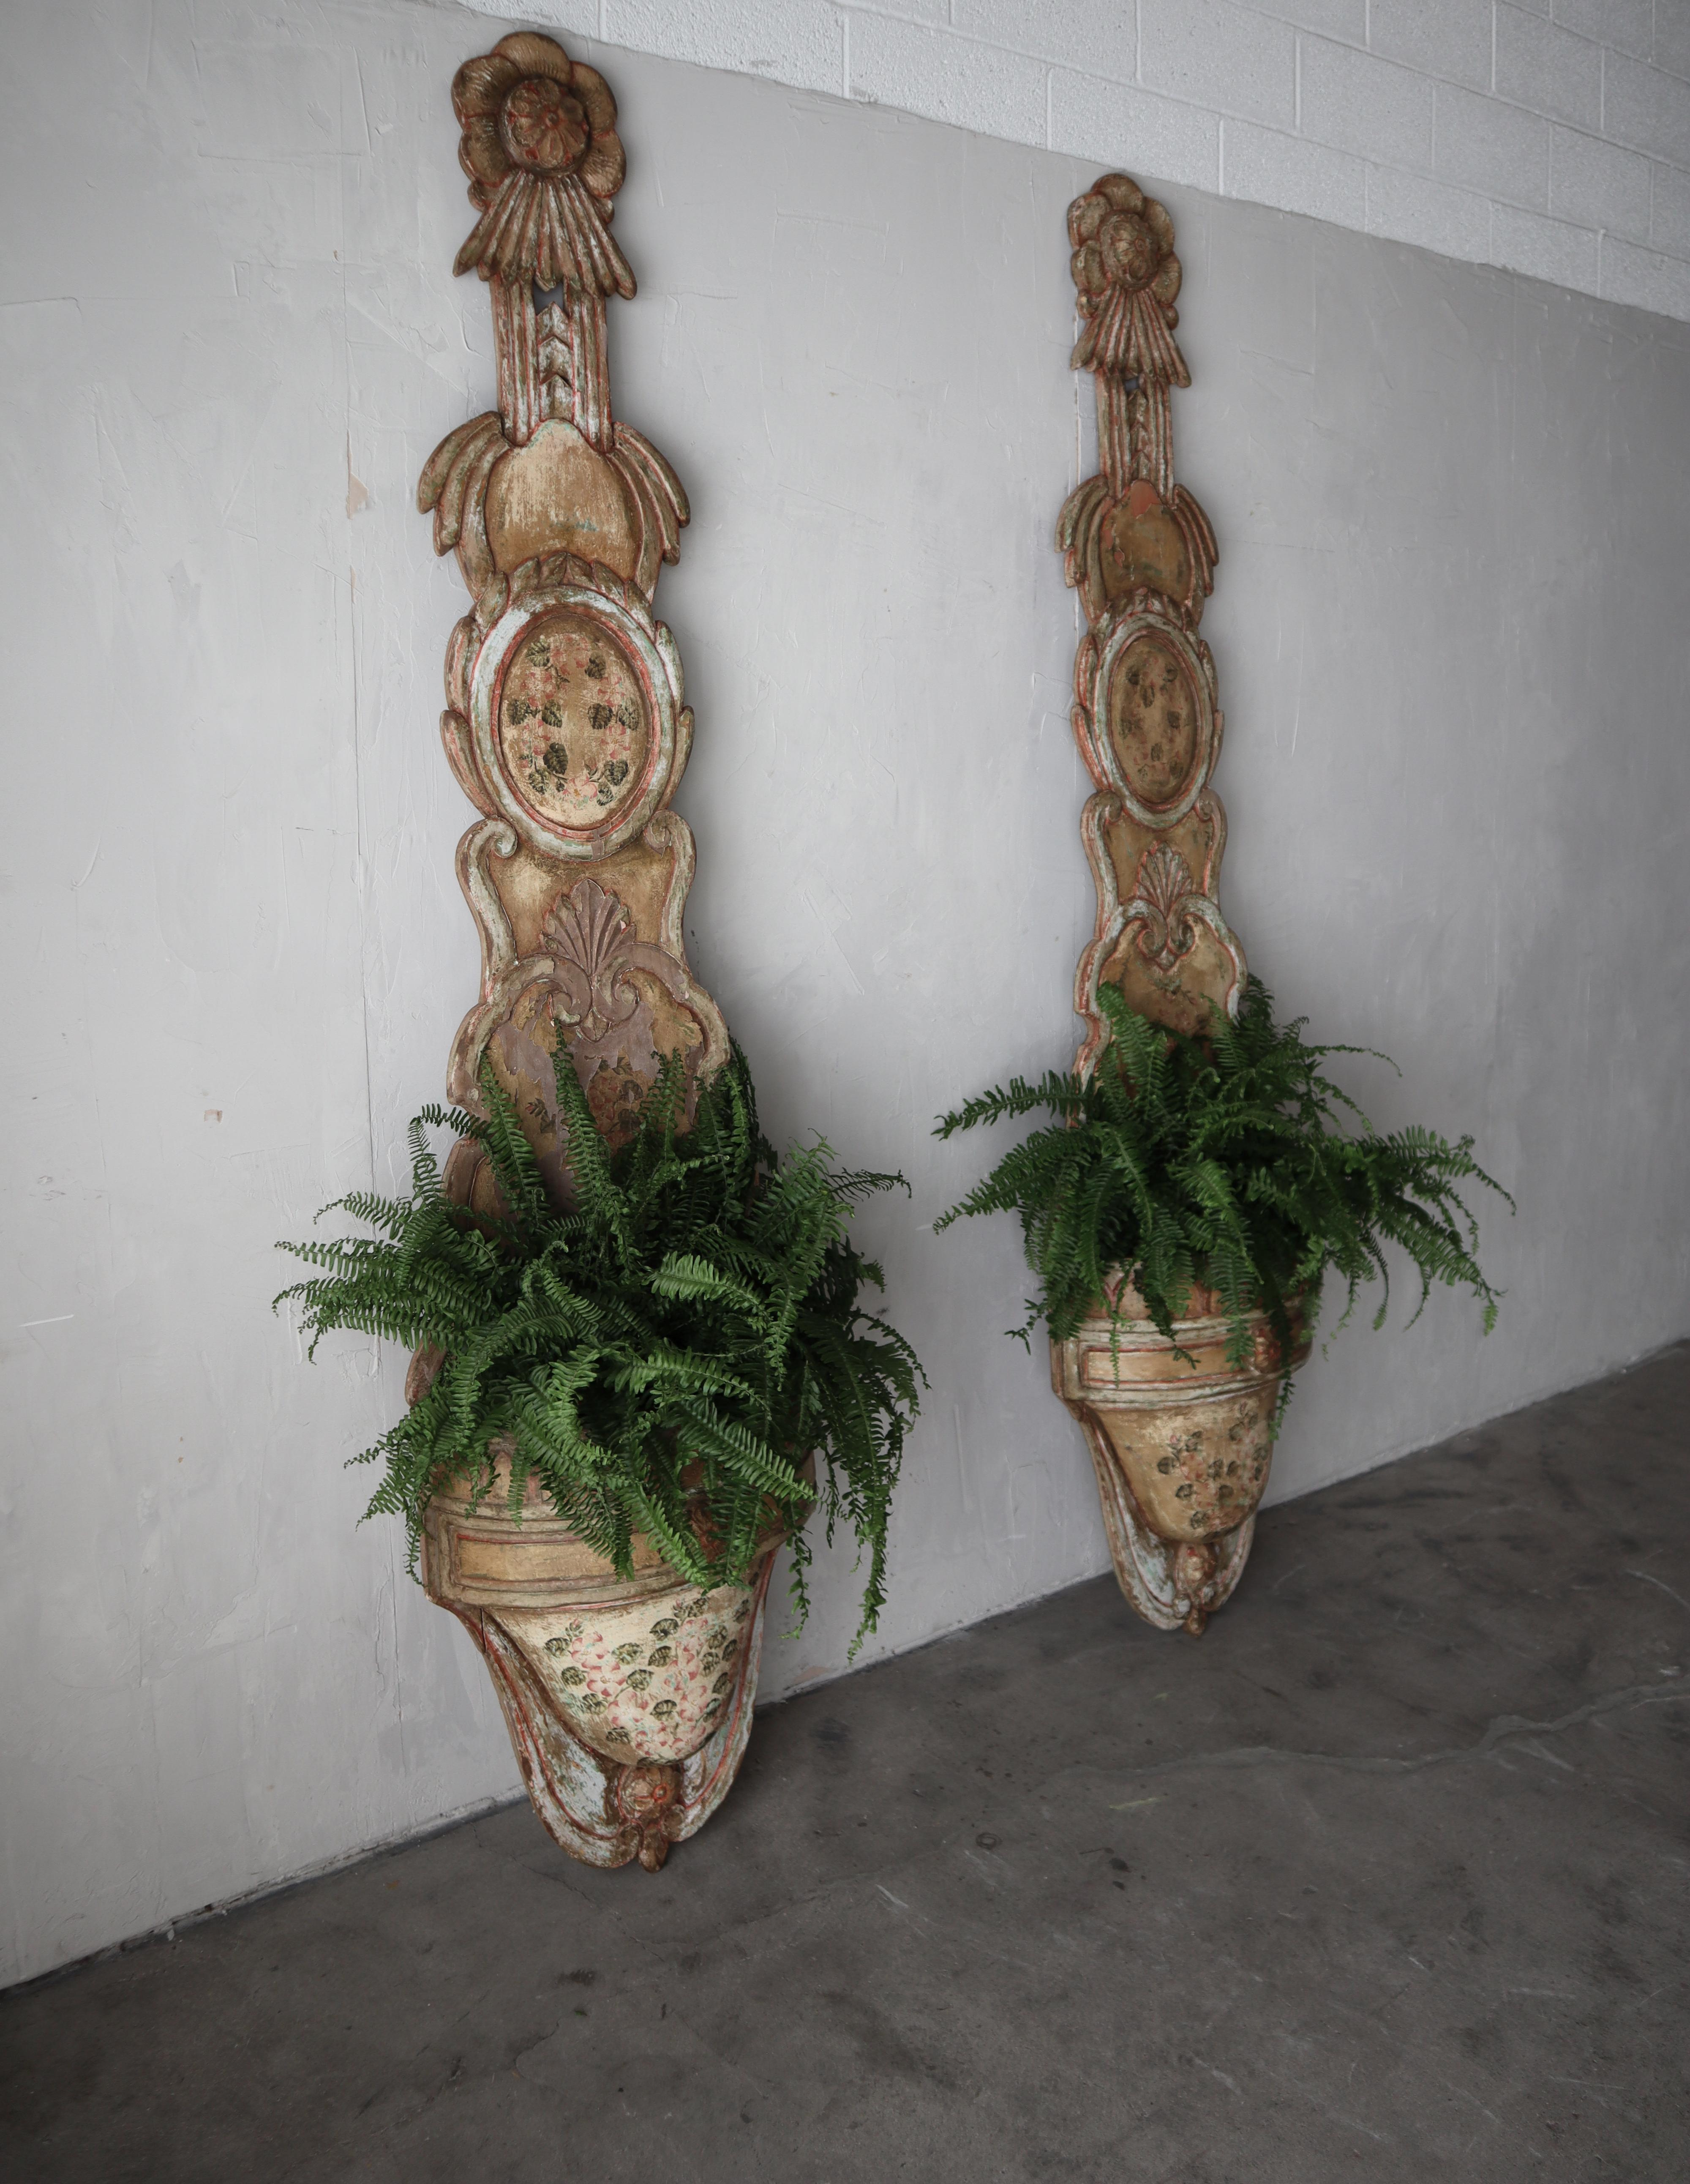 19th Century 8ft Tall Pair of Antique European Wood Jardiniere Planters For Sale